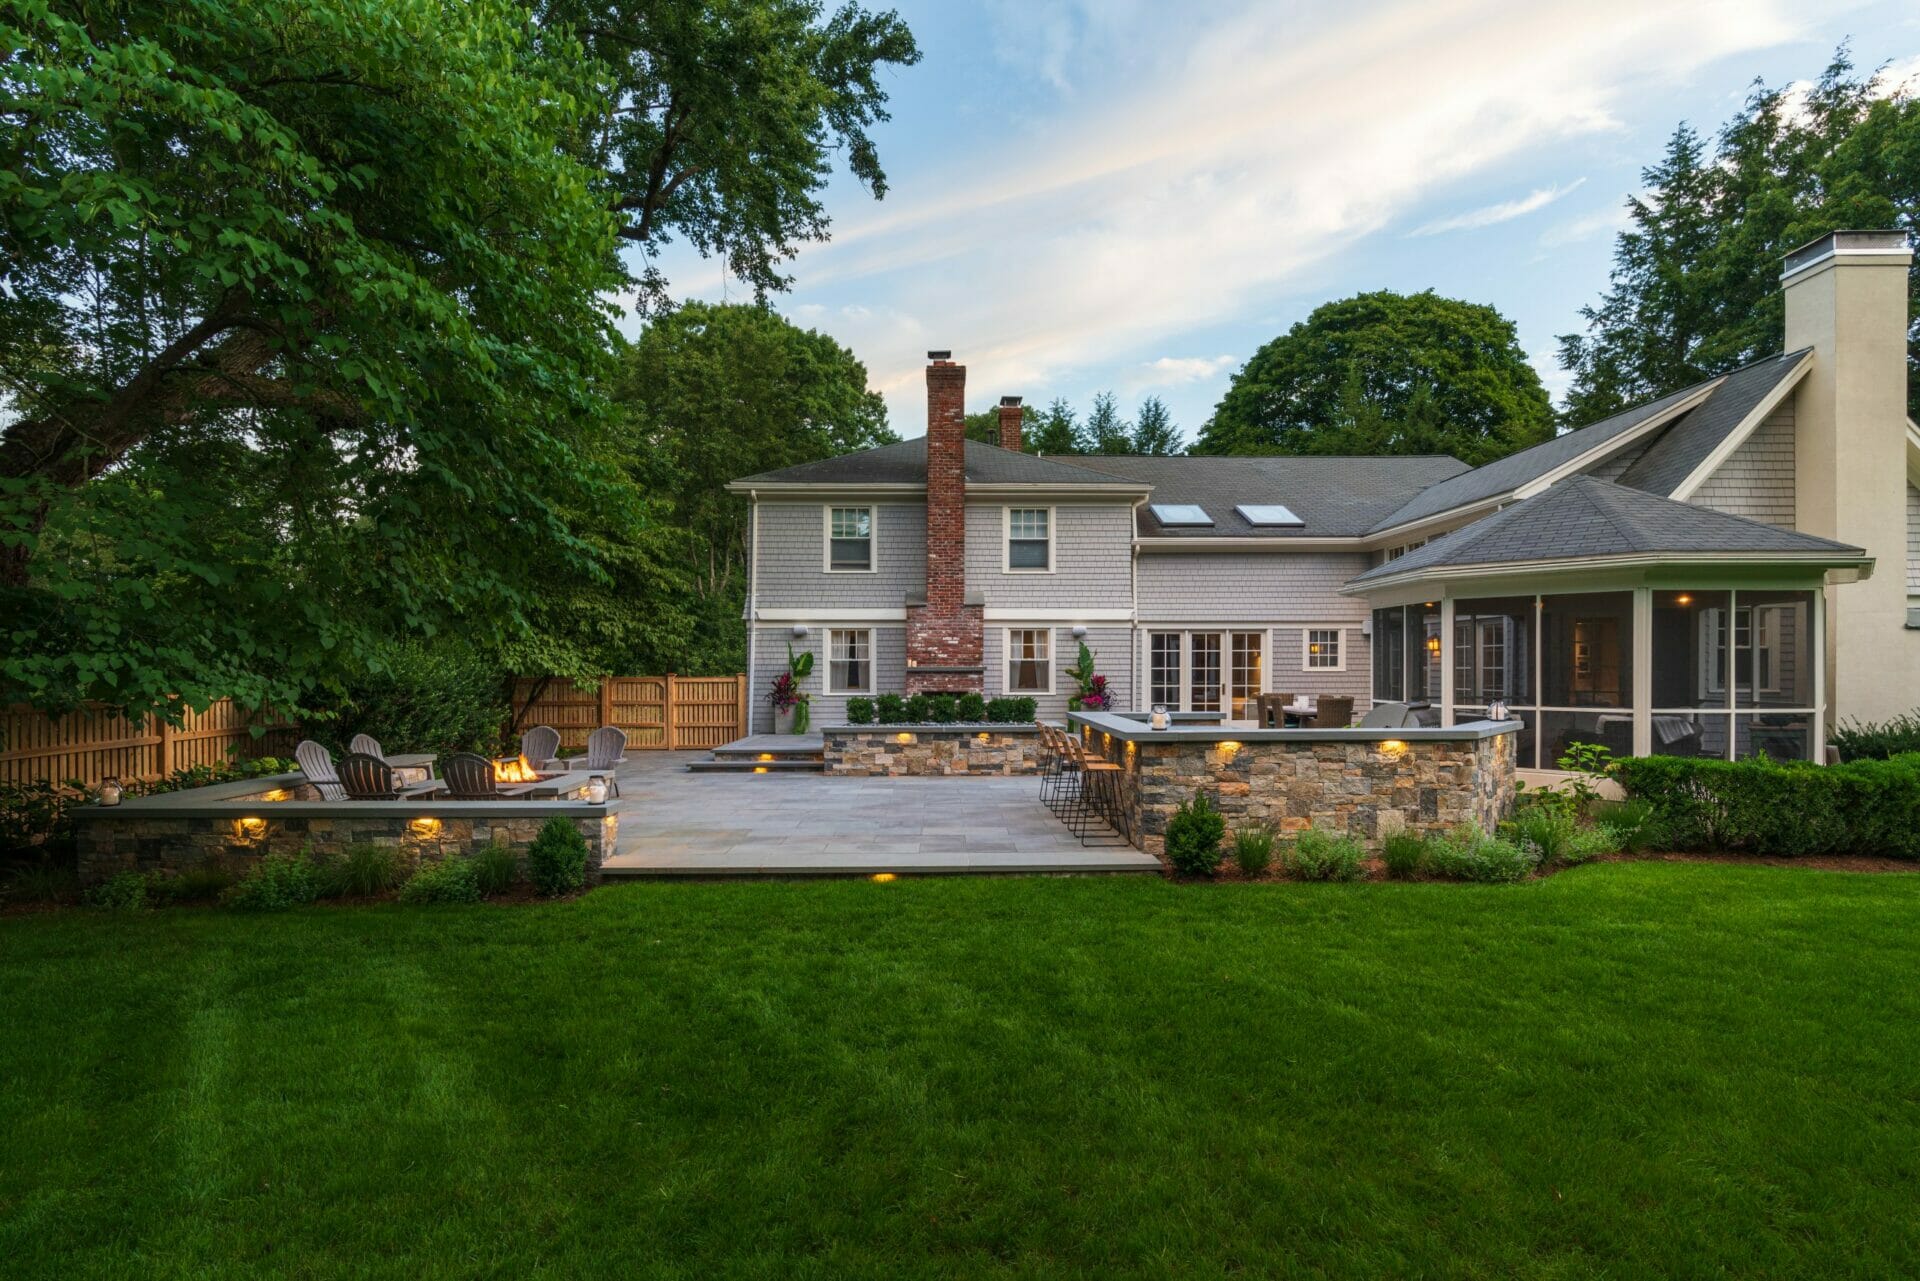 completed landscape design project in Wayland, MA